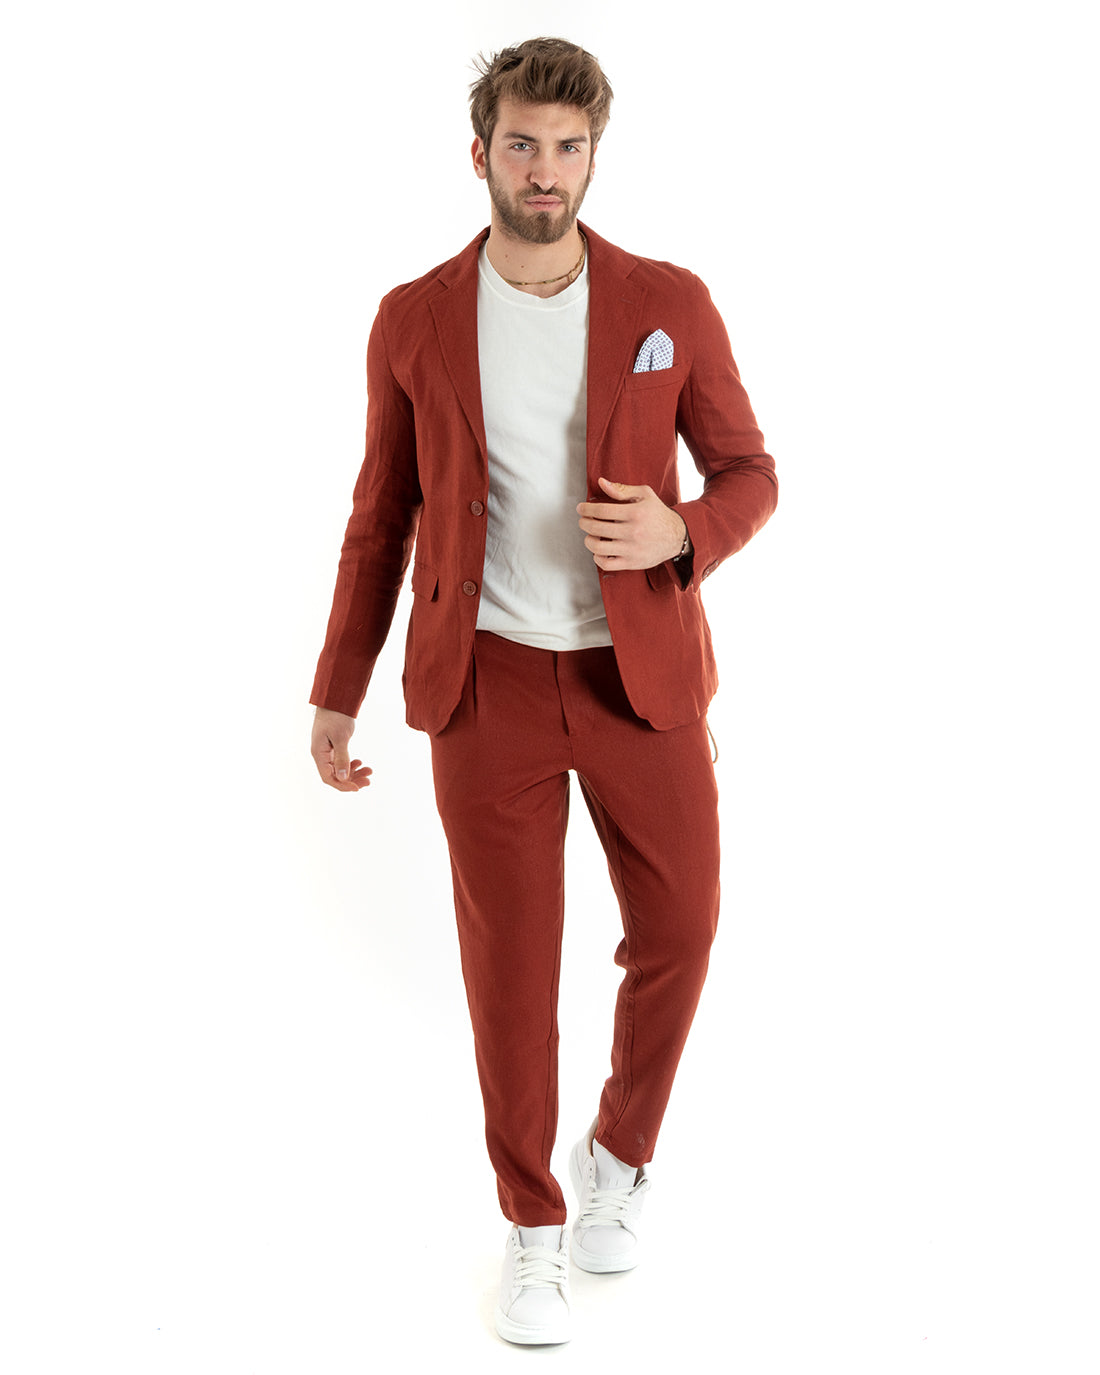 Single-breasted men's suit, tailored linen suit, jacket, trousers, solid color, brick GIOSAL-OU2328A